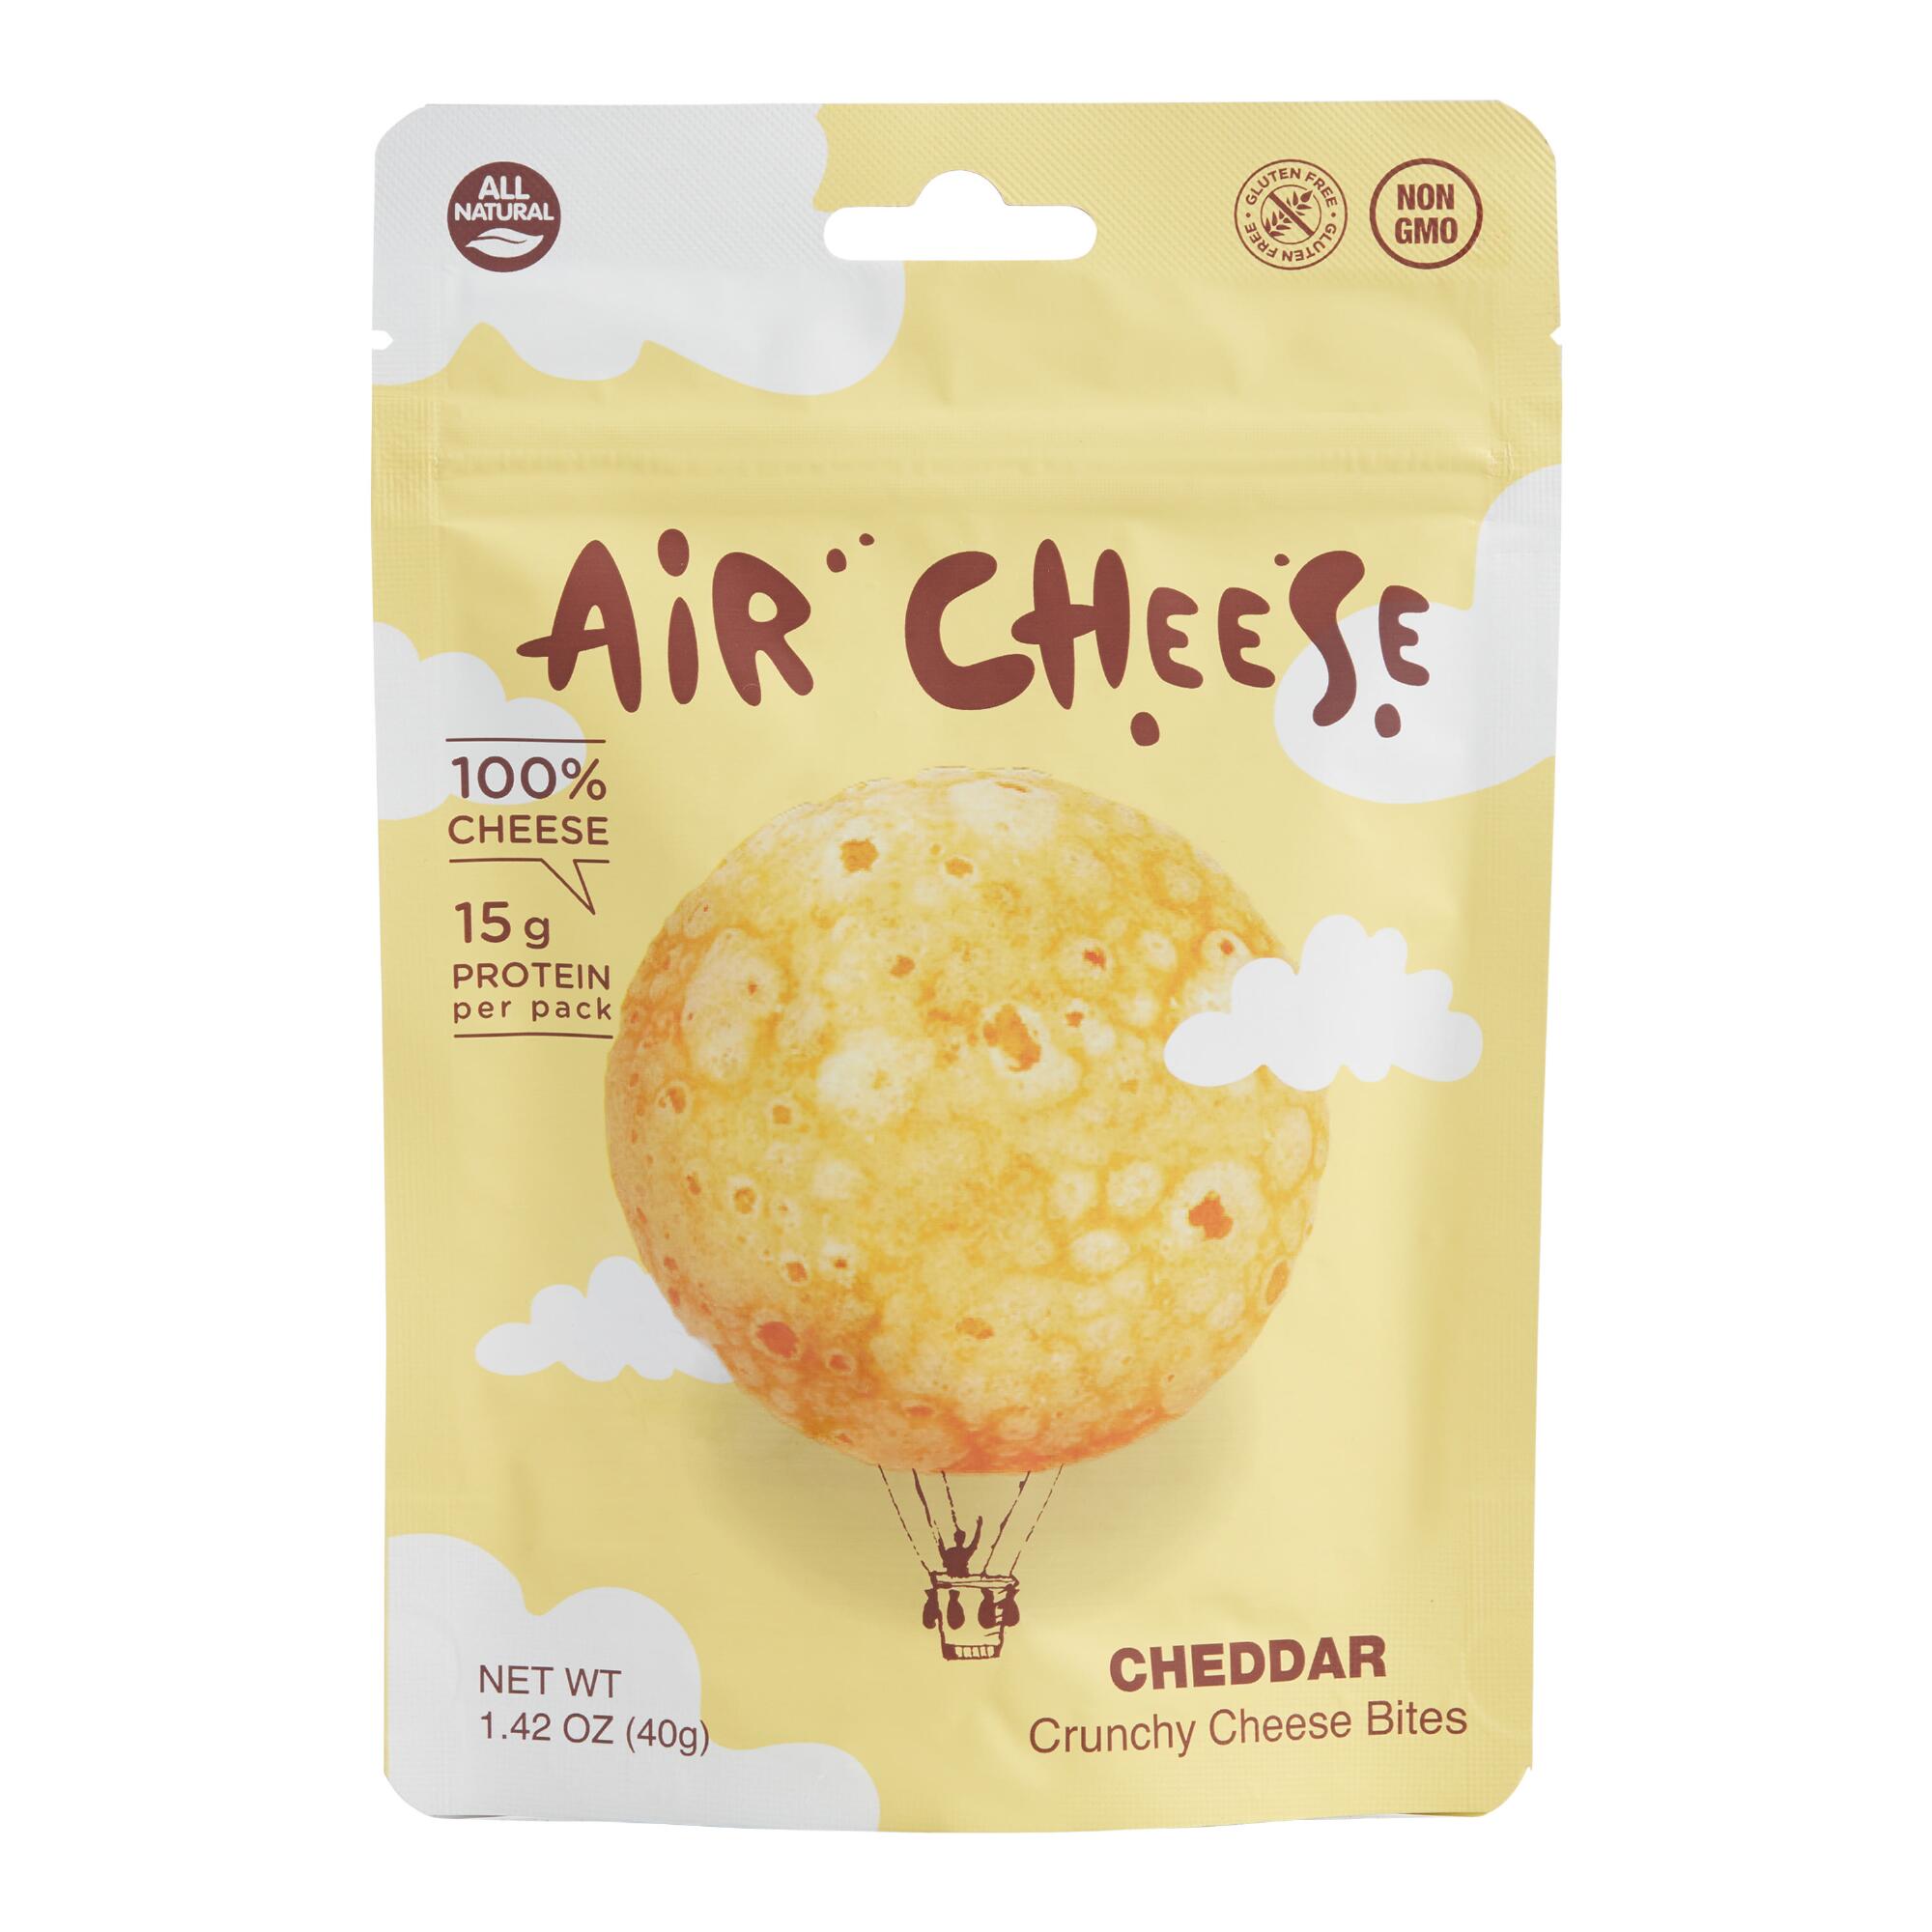 Air Cheese Cheddar Crunchy Cheese Bites Set of 10 by World Market